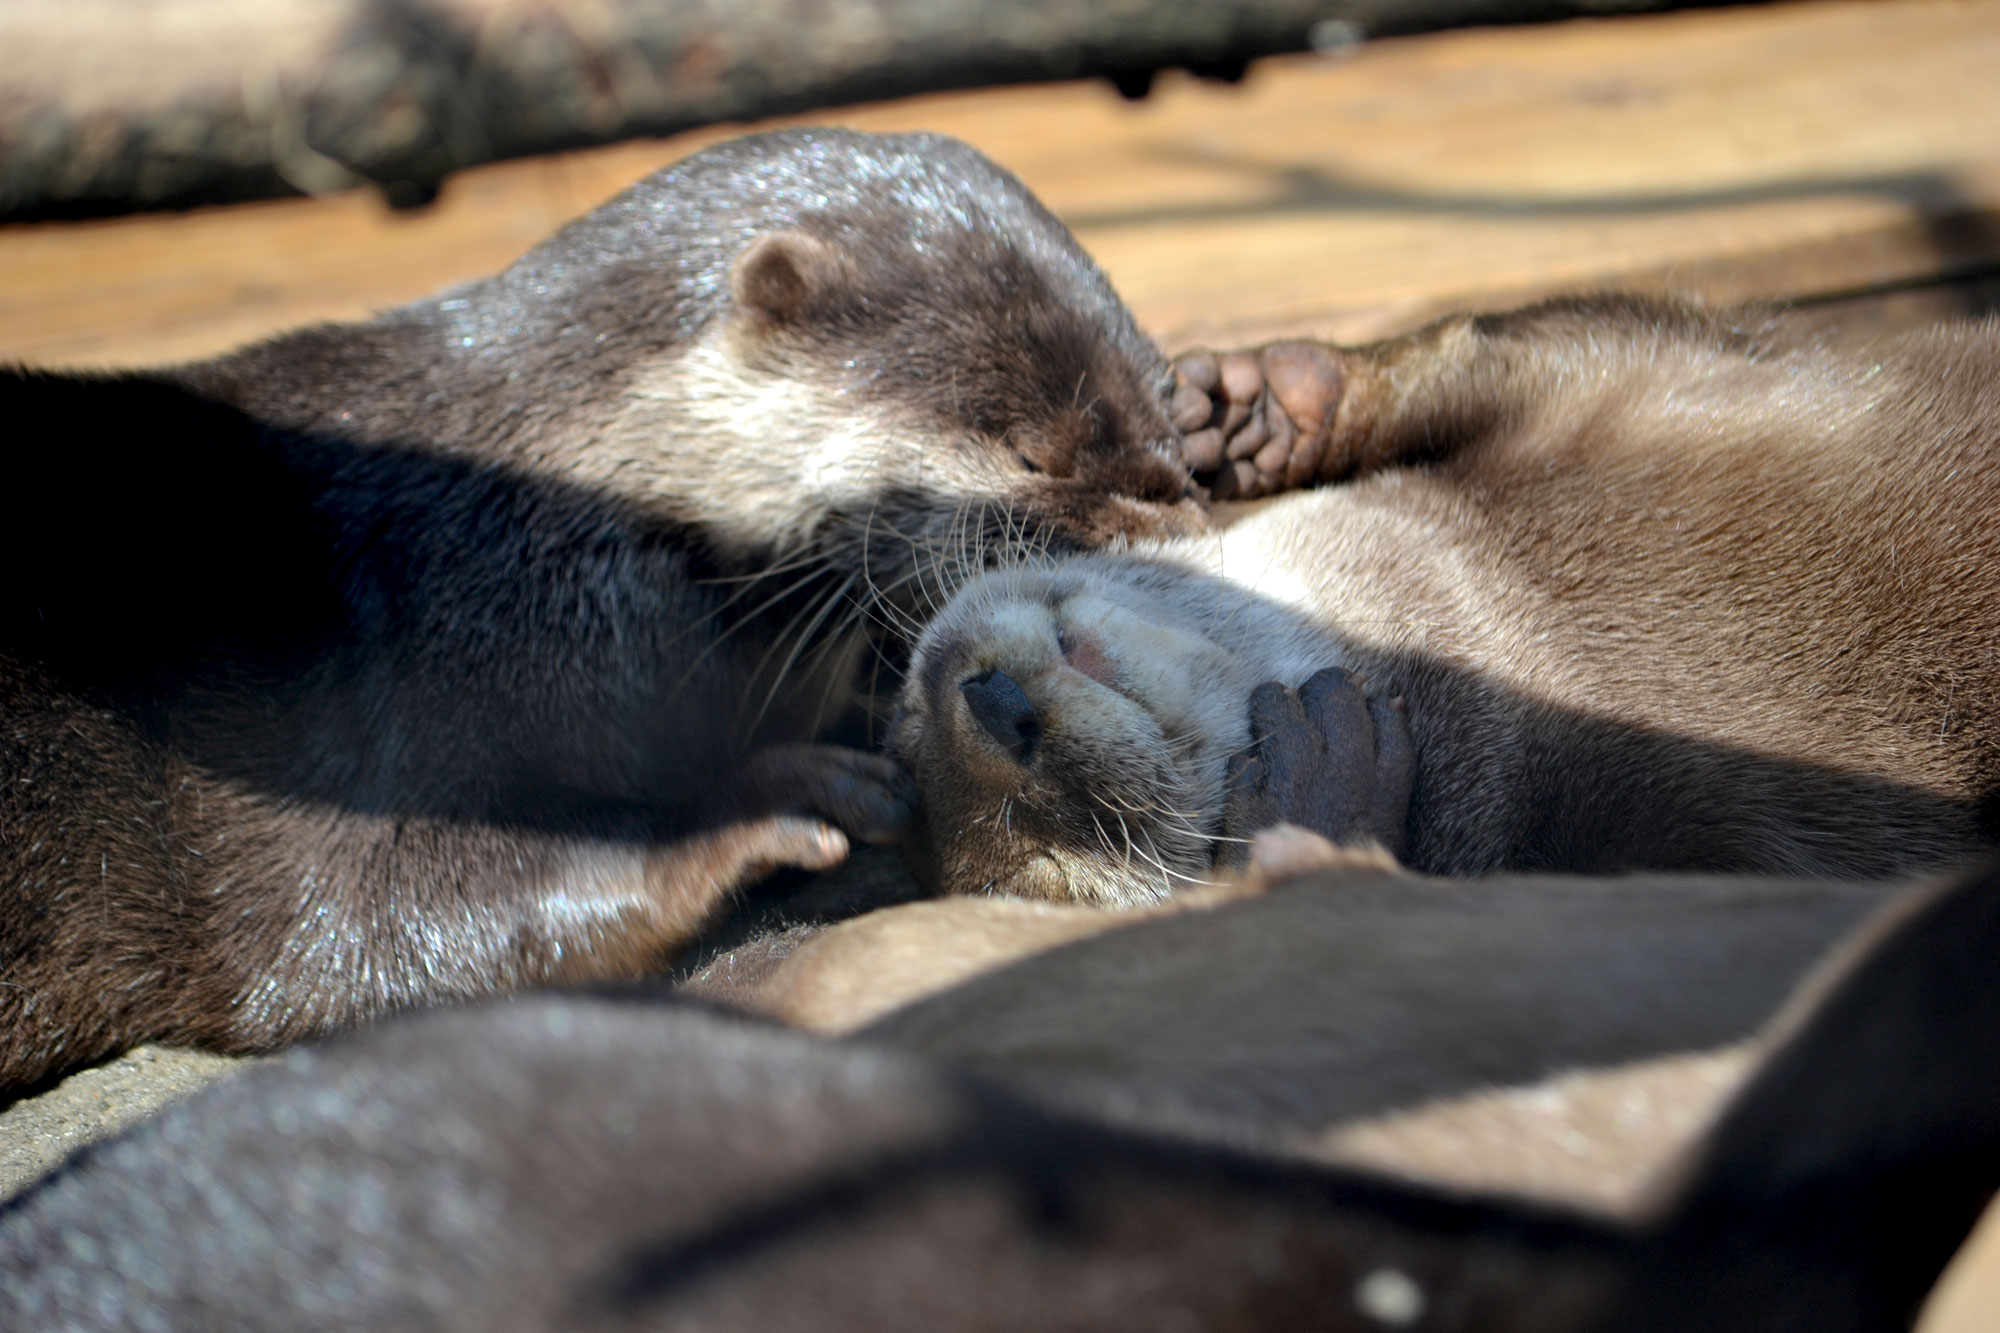 Otter Sweetly Nuzzles Her Friend